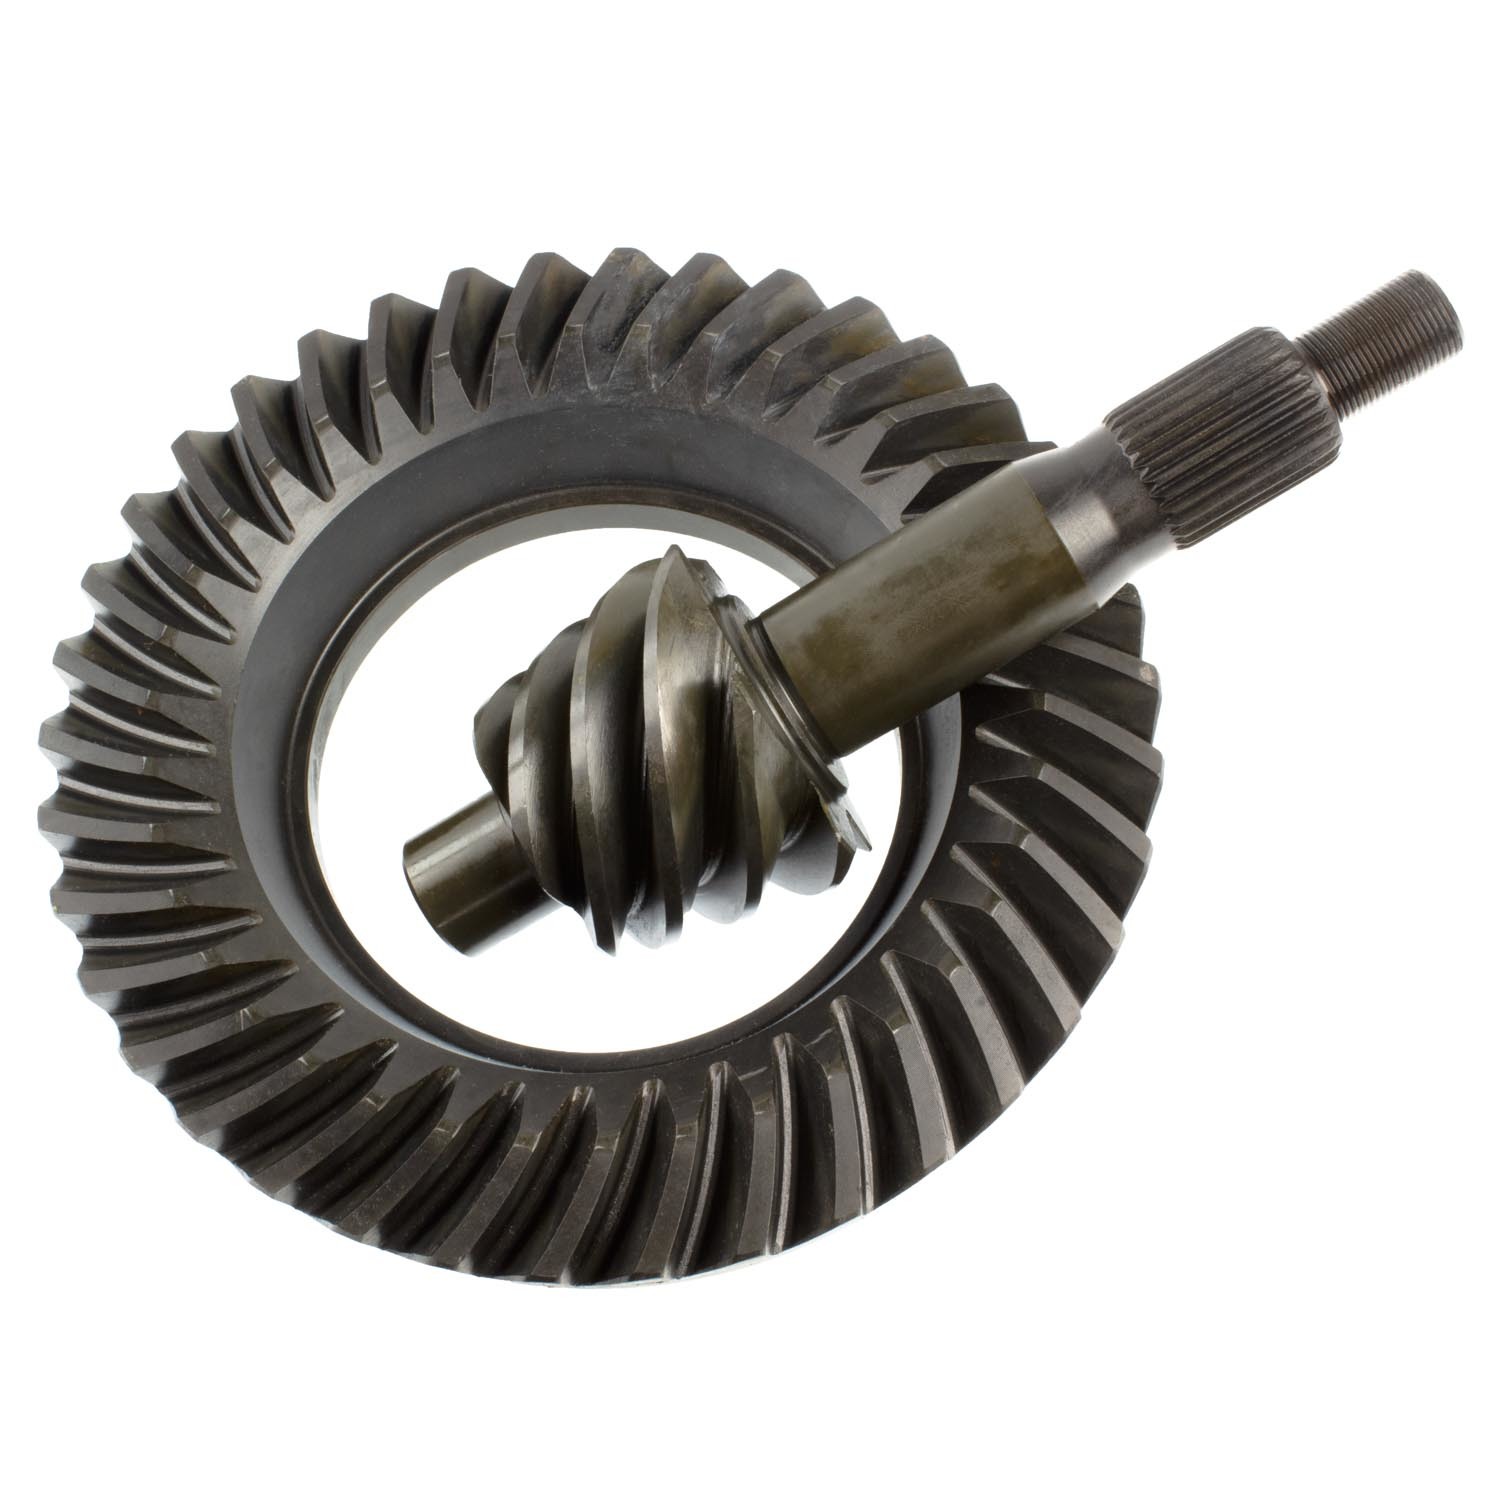 Richmond Gear F9633 - Ring and Pinion, Excel, 6.33 Ratio, 28 Spline Pinion, Ford 9 in, Kit